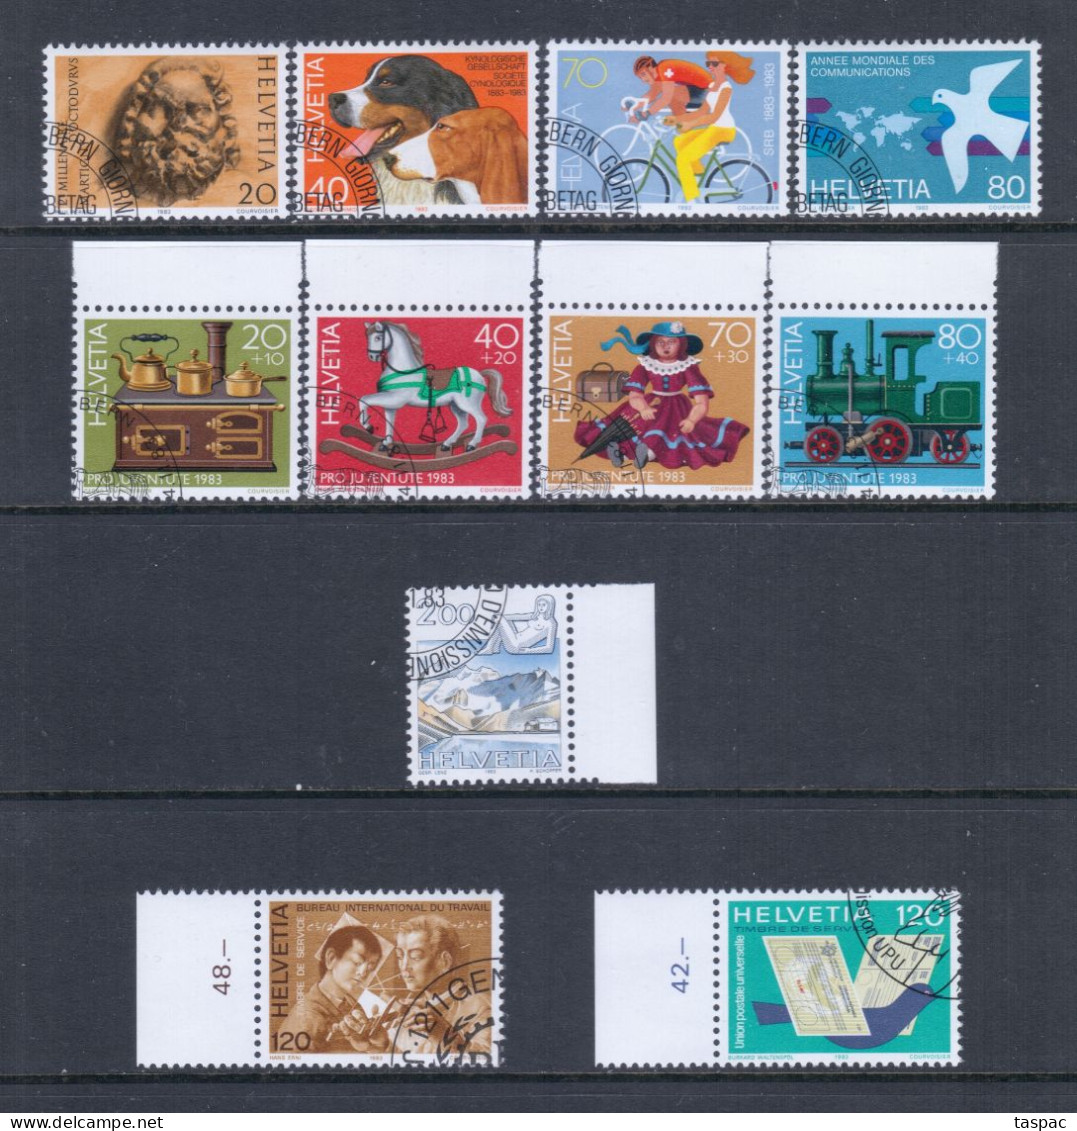 Switzerland 1983 Complete Year Set - Used (CTO) - 25 Stamps (please See Description) - Gebraucht